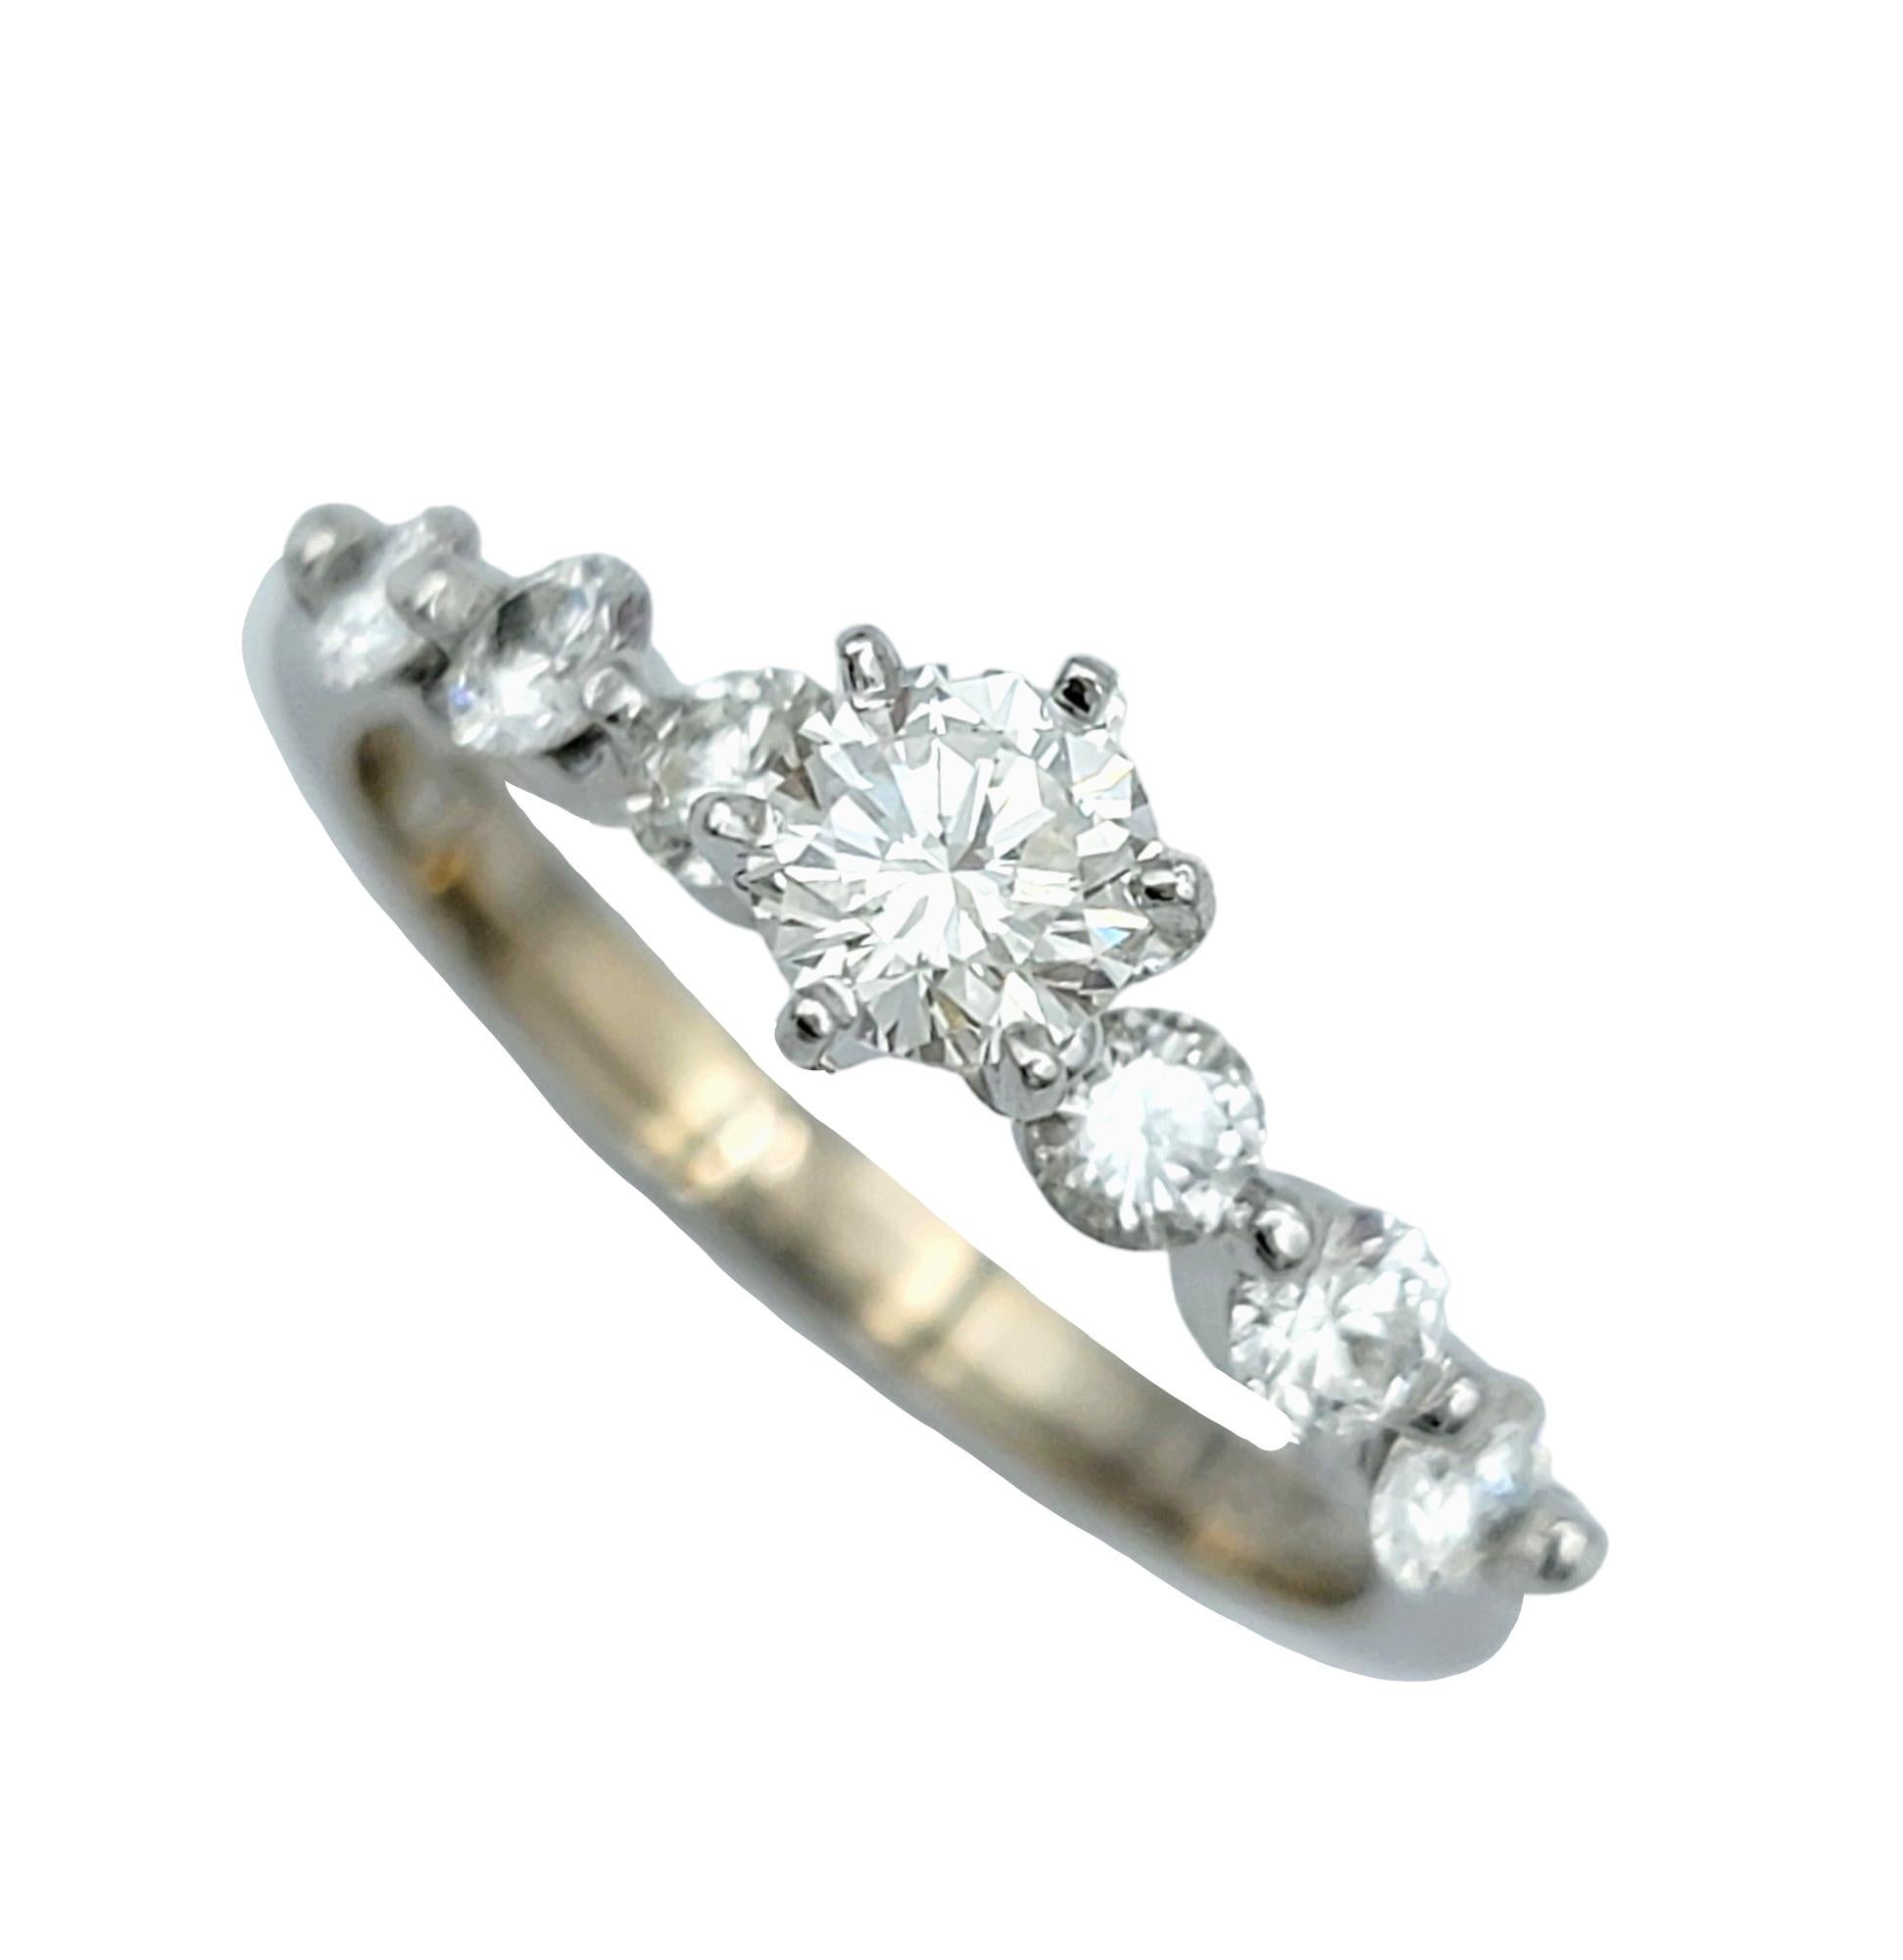 Ring Size: 7

This elegant and refined round diamond engagement ring exudes timeless sophistication, set delicately in shimmering 14 karat white gold. At its focal point sits a resplendent center diamond, gracefully elevated above the finger,